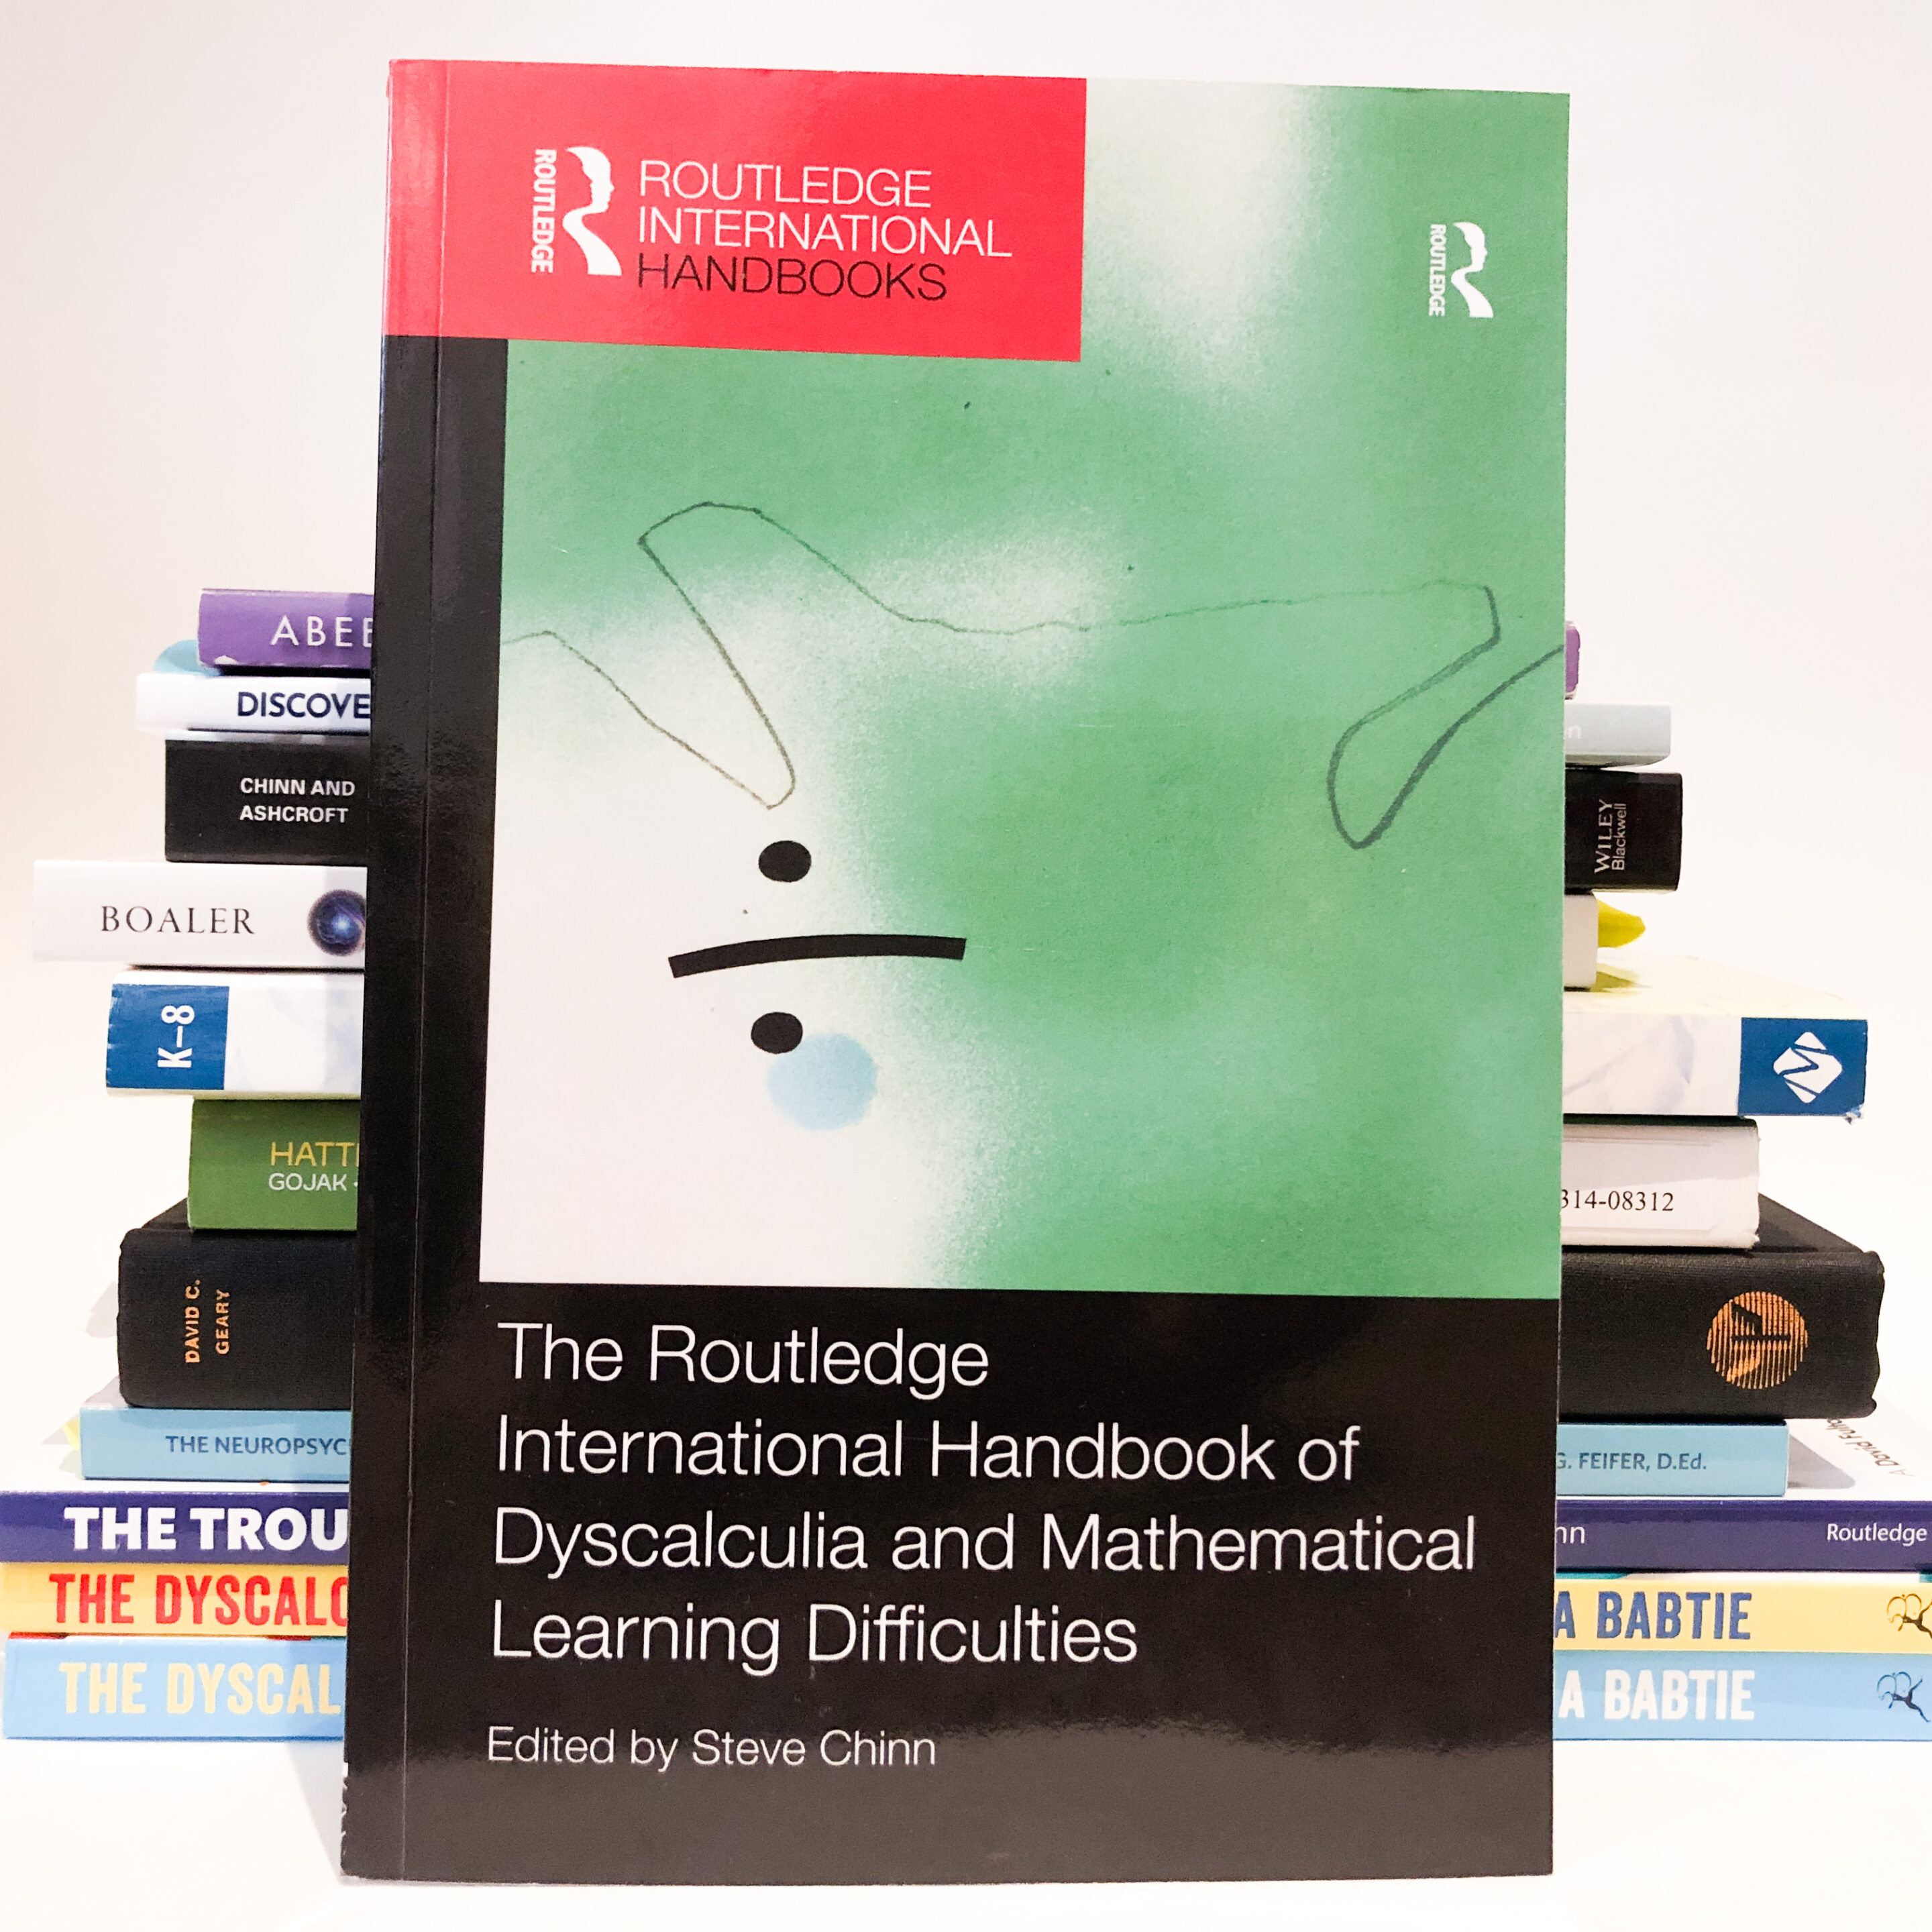 The Routledge International Handbook of Dyscalculia and Math Learning Disabilities